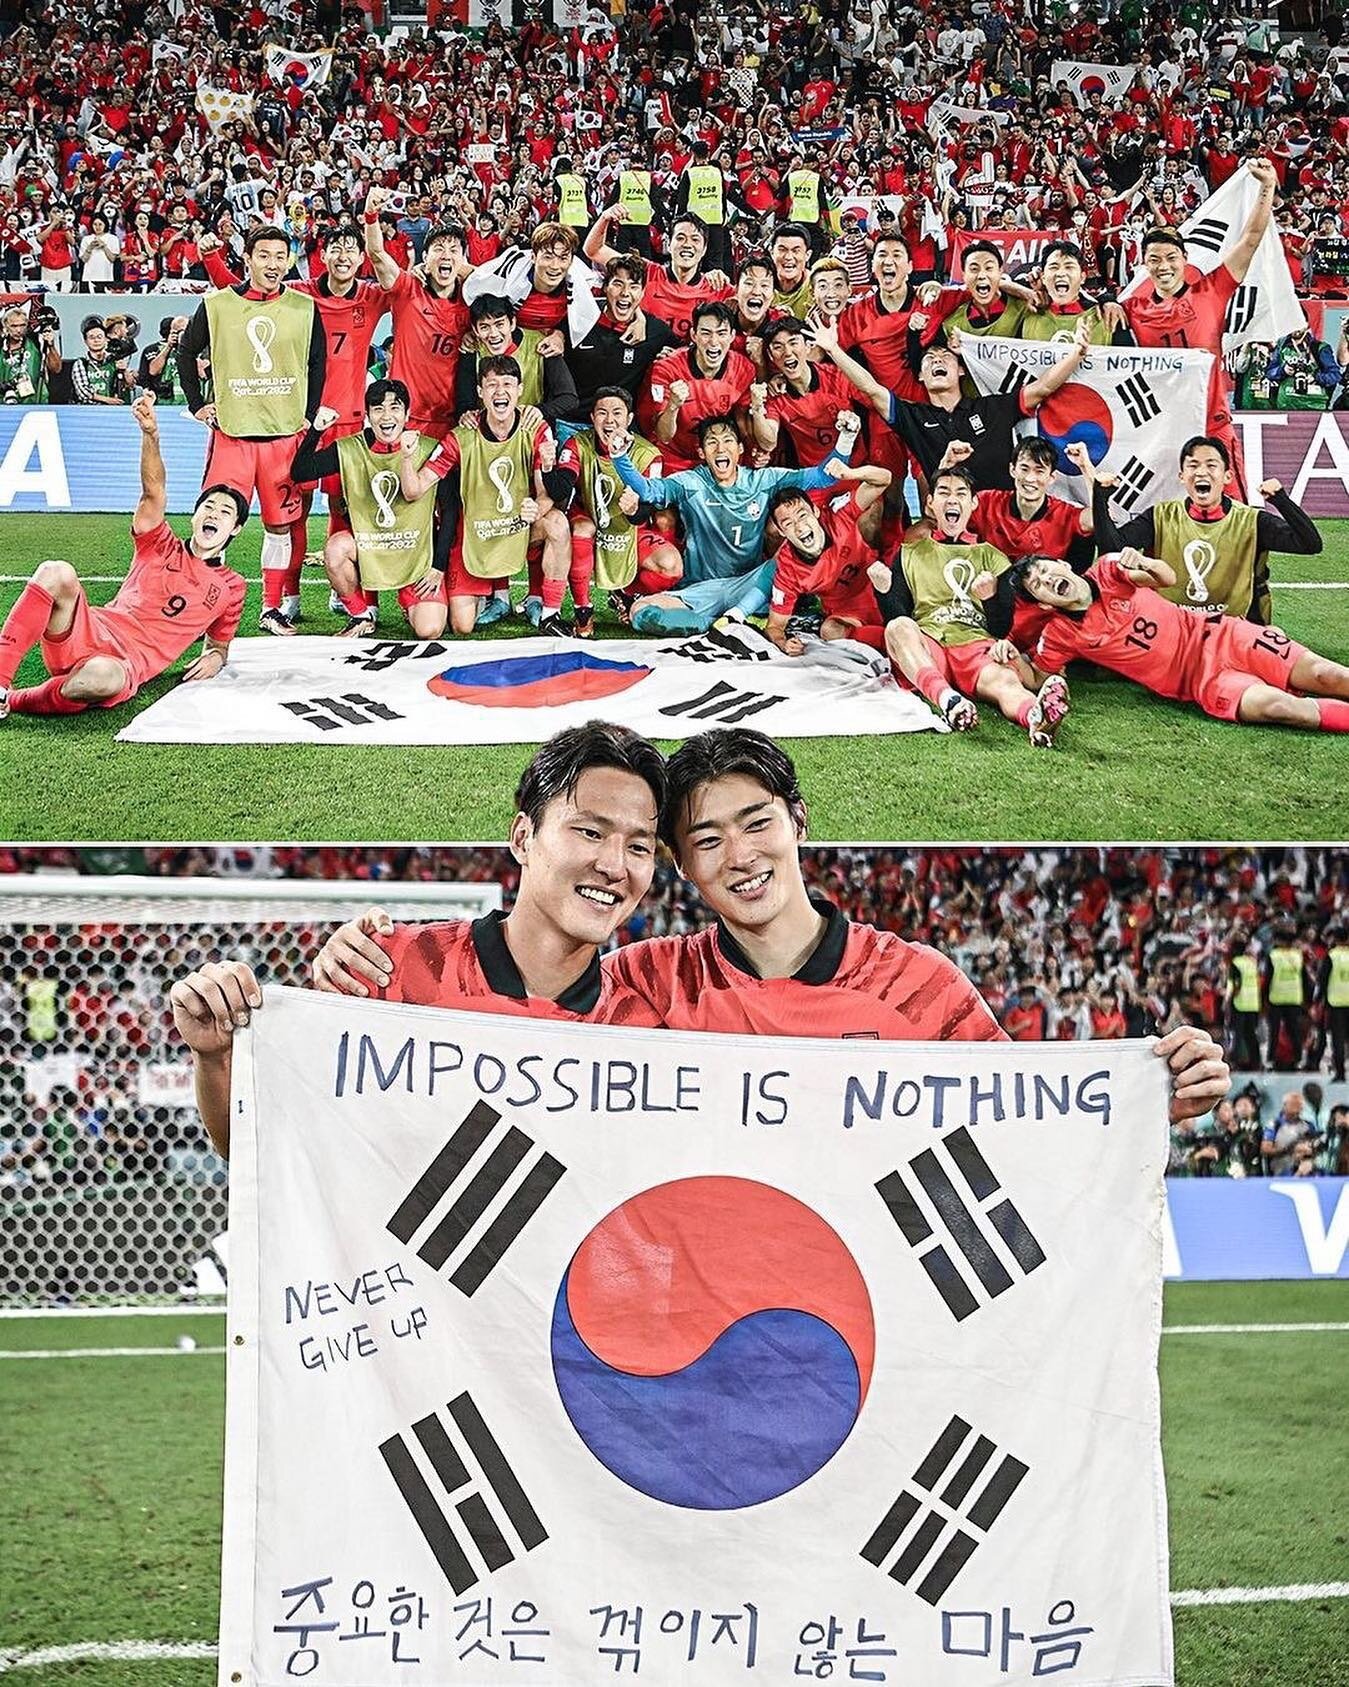 All of us are overwhelmed last night 👏😃. 
Go Korea 🇰🇷 ⚽️ ! See you at round 16 🎉 
🎶 Look who we are, we are the dreamers. We make it happen, cause we believe it 🎶 ~ Jung Kook BTS 

📸 @seoul.southkorea 

#fifaworldcup2022 #fifa #koreanworldcup